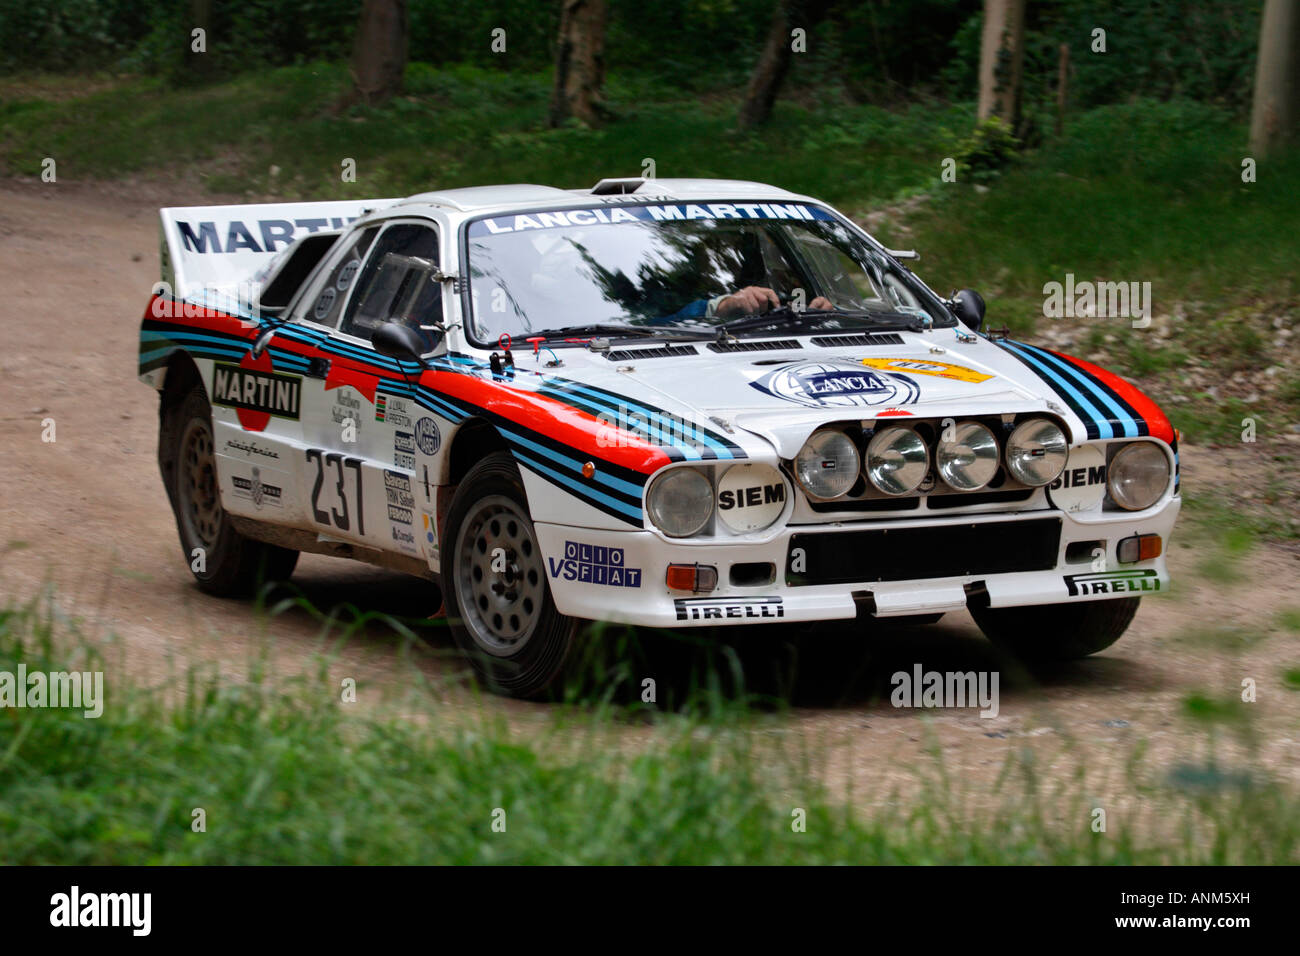 Lancia Martini Historic Rally Car On The Rally Section At Goodwood Festival Of Speed West Sussex Stock Photo